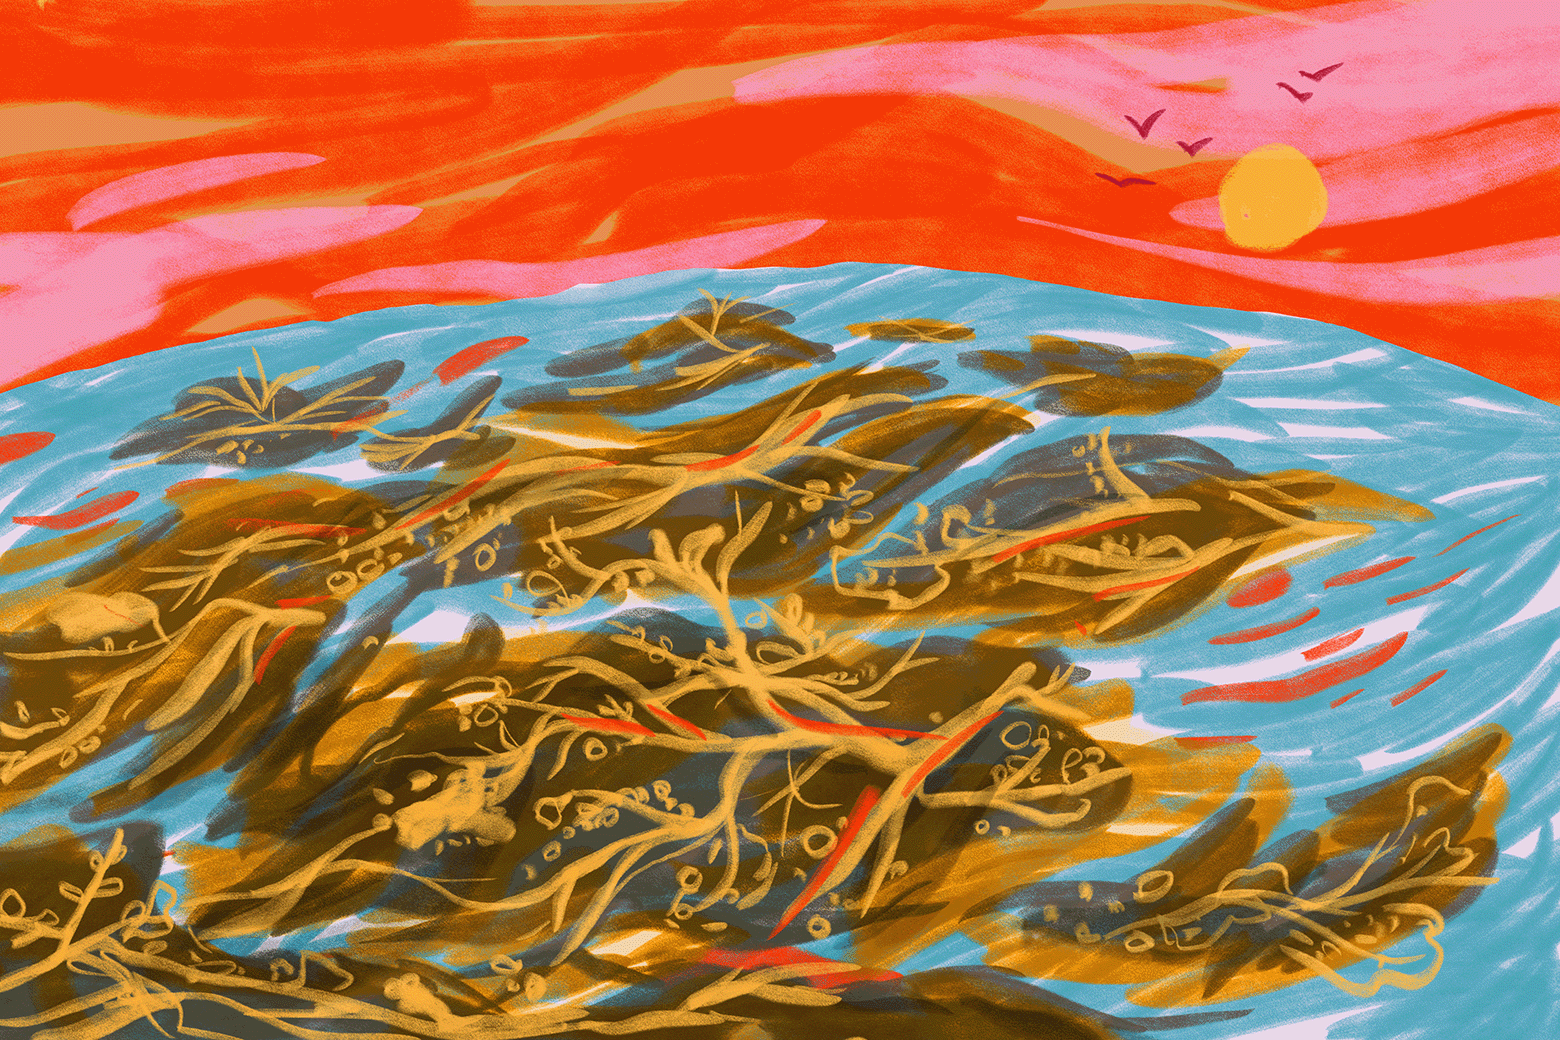 Green seaweed under a turquoise ocean moves with the current as birds fly in an orange and pink sky. 